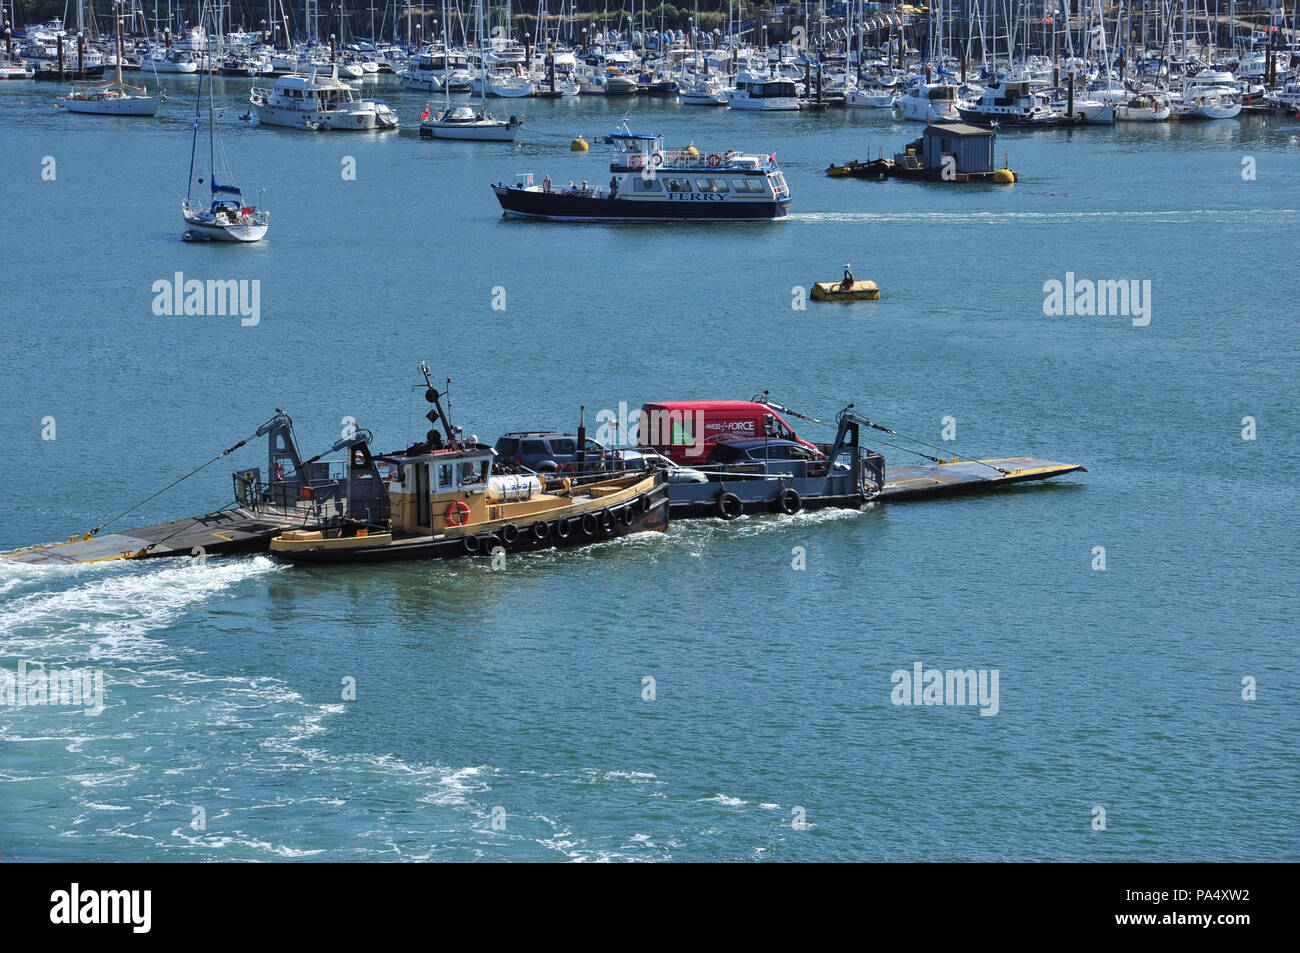 Lower ferry between Dartmouth and Kingswear, South Devon, England, UK Stock Photo